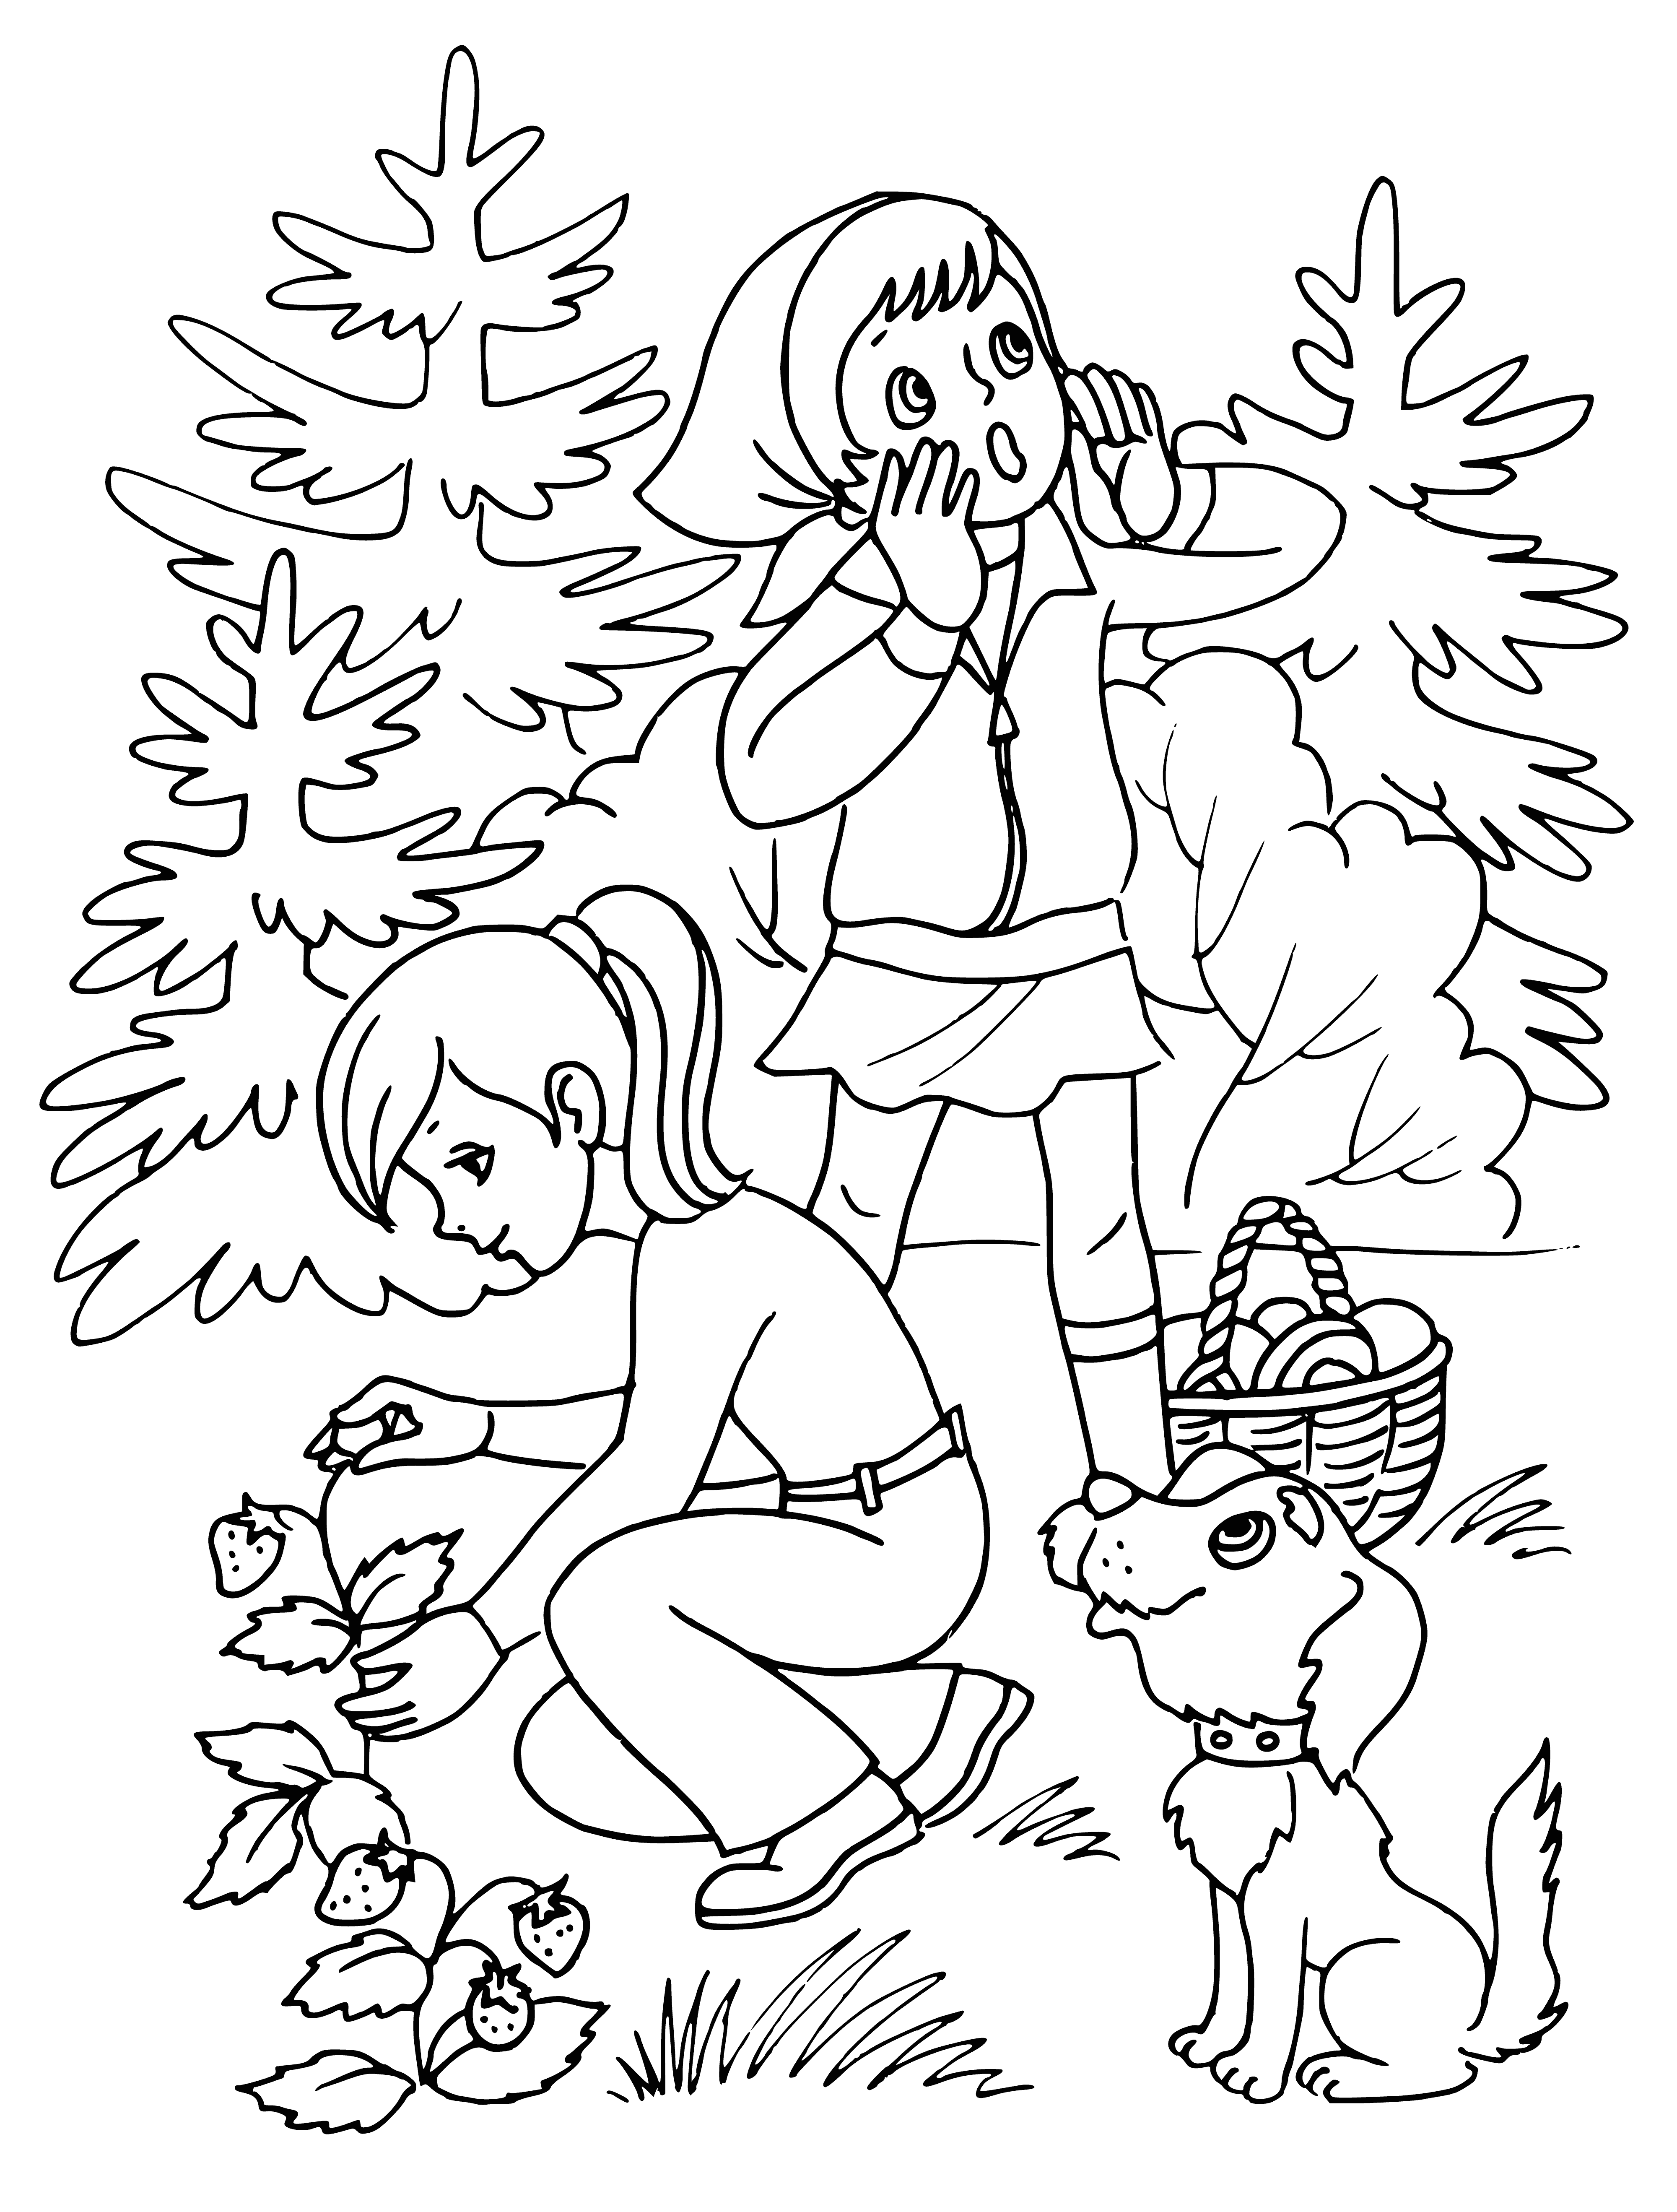 Children in the summer in the forest coloring page